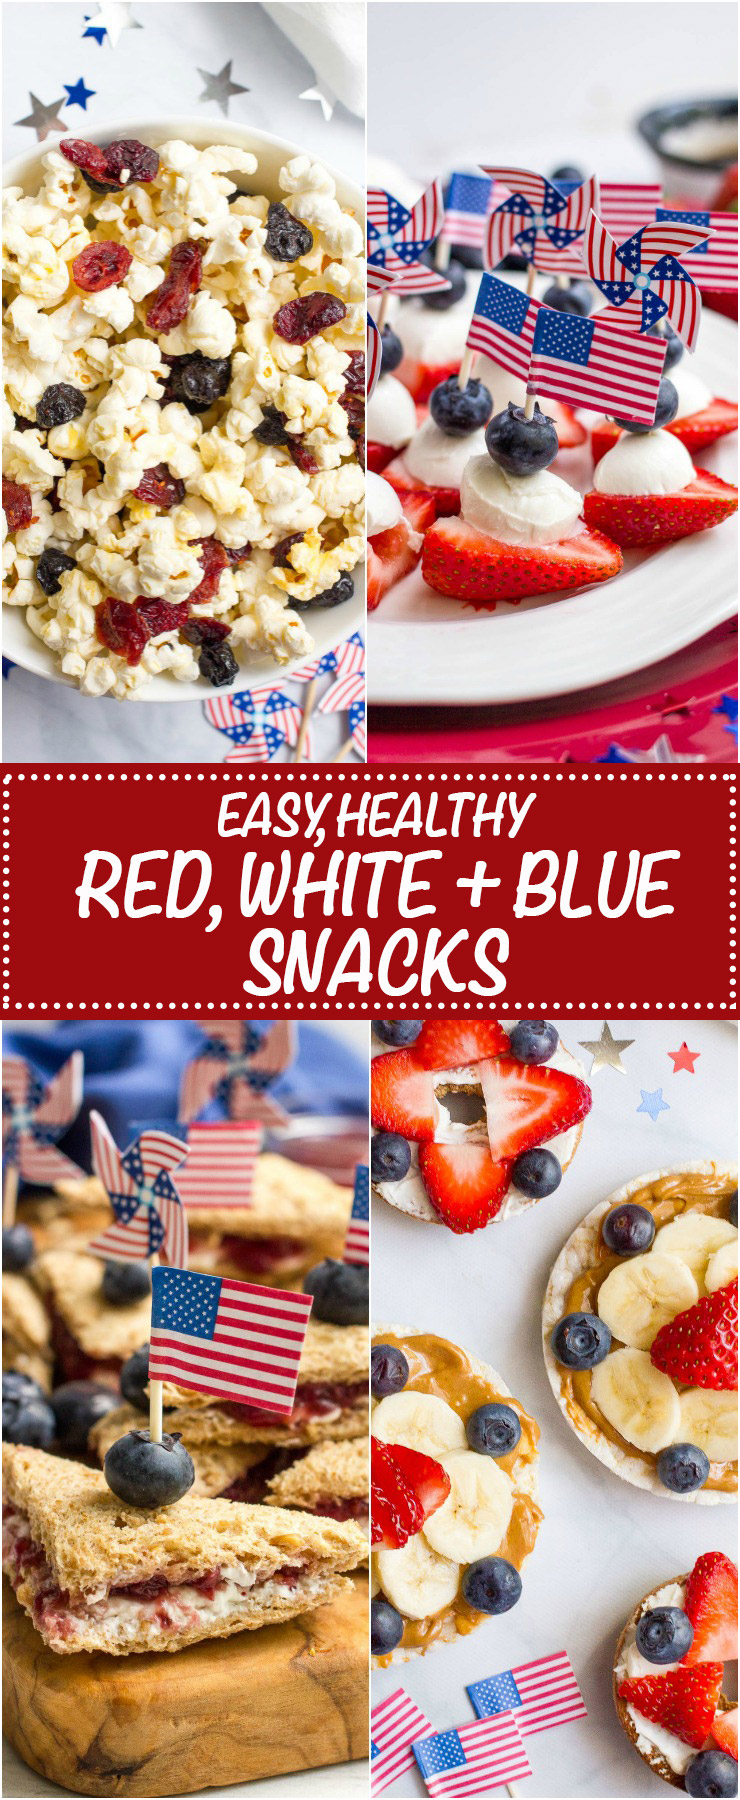 Easy, healthy July 4th appetizers and snacks that are red, white and blue - great festive ideas and recipes for kids and adults! | www.familyfoodonthetable.com